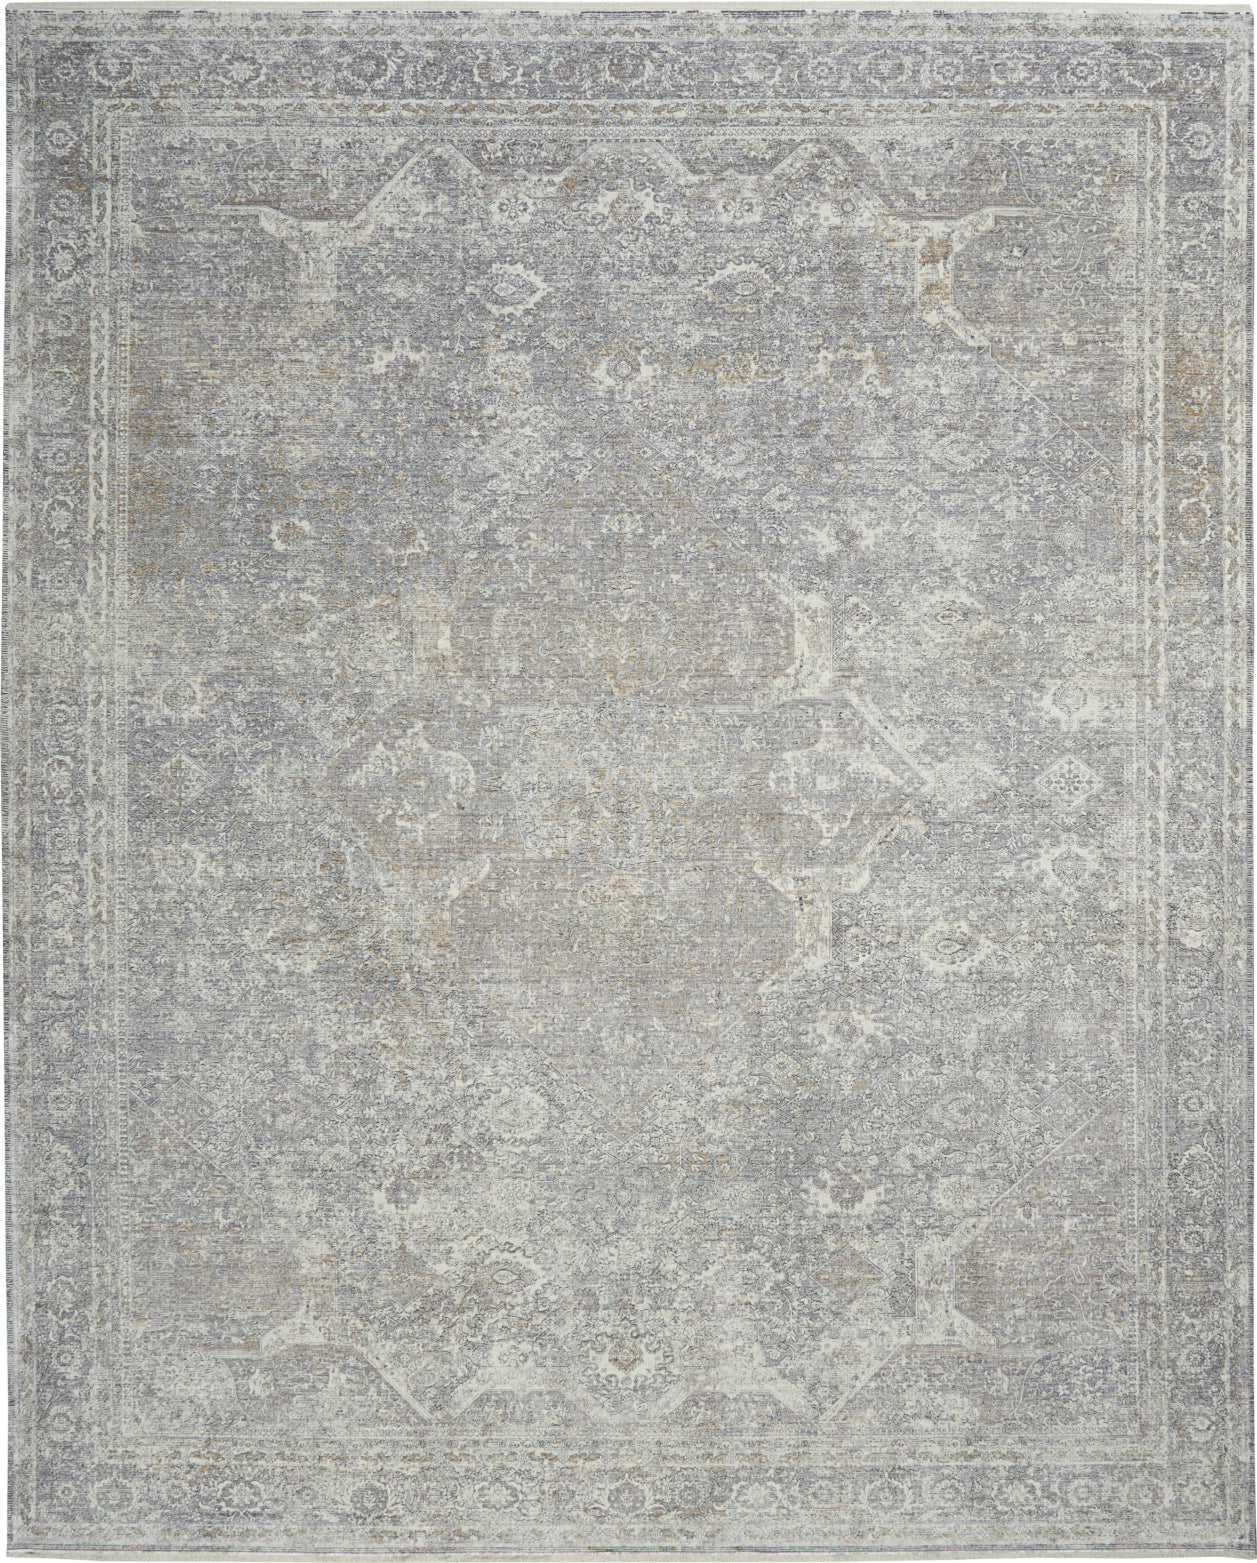 Starry Nights STN03 Silver/Cream Area Rug by Nourison Main Image